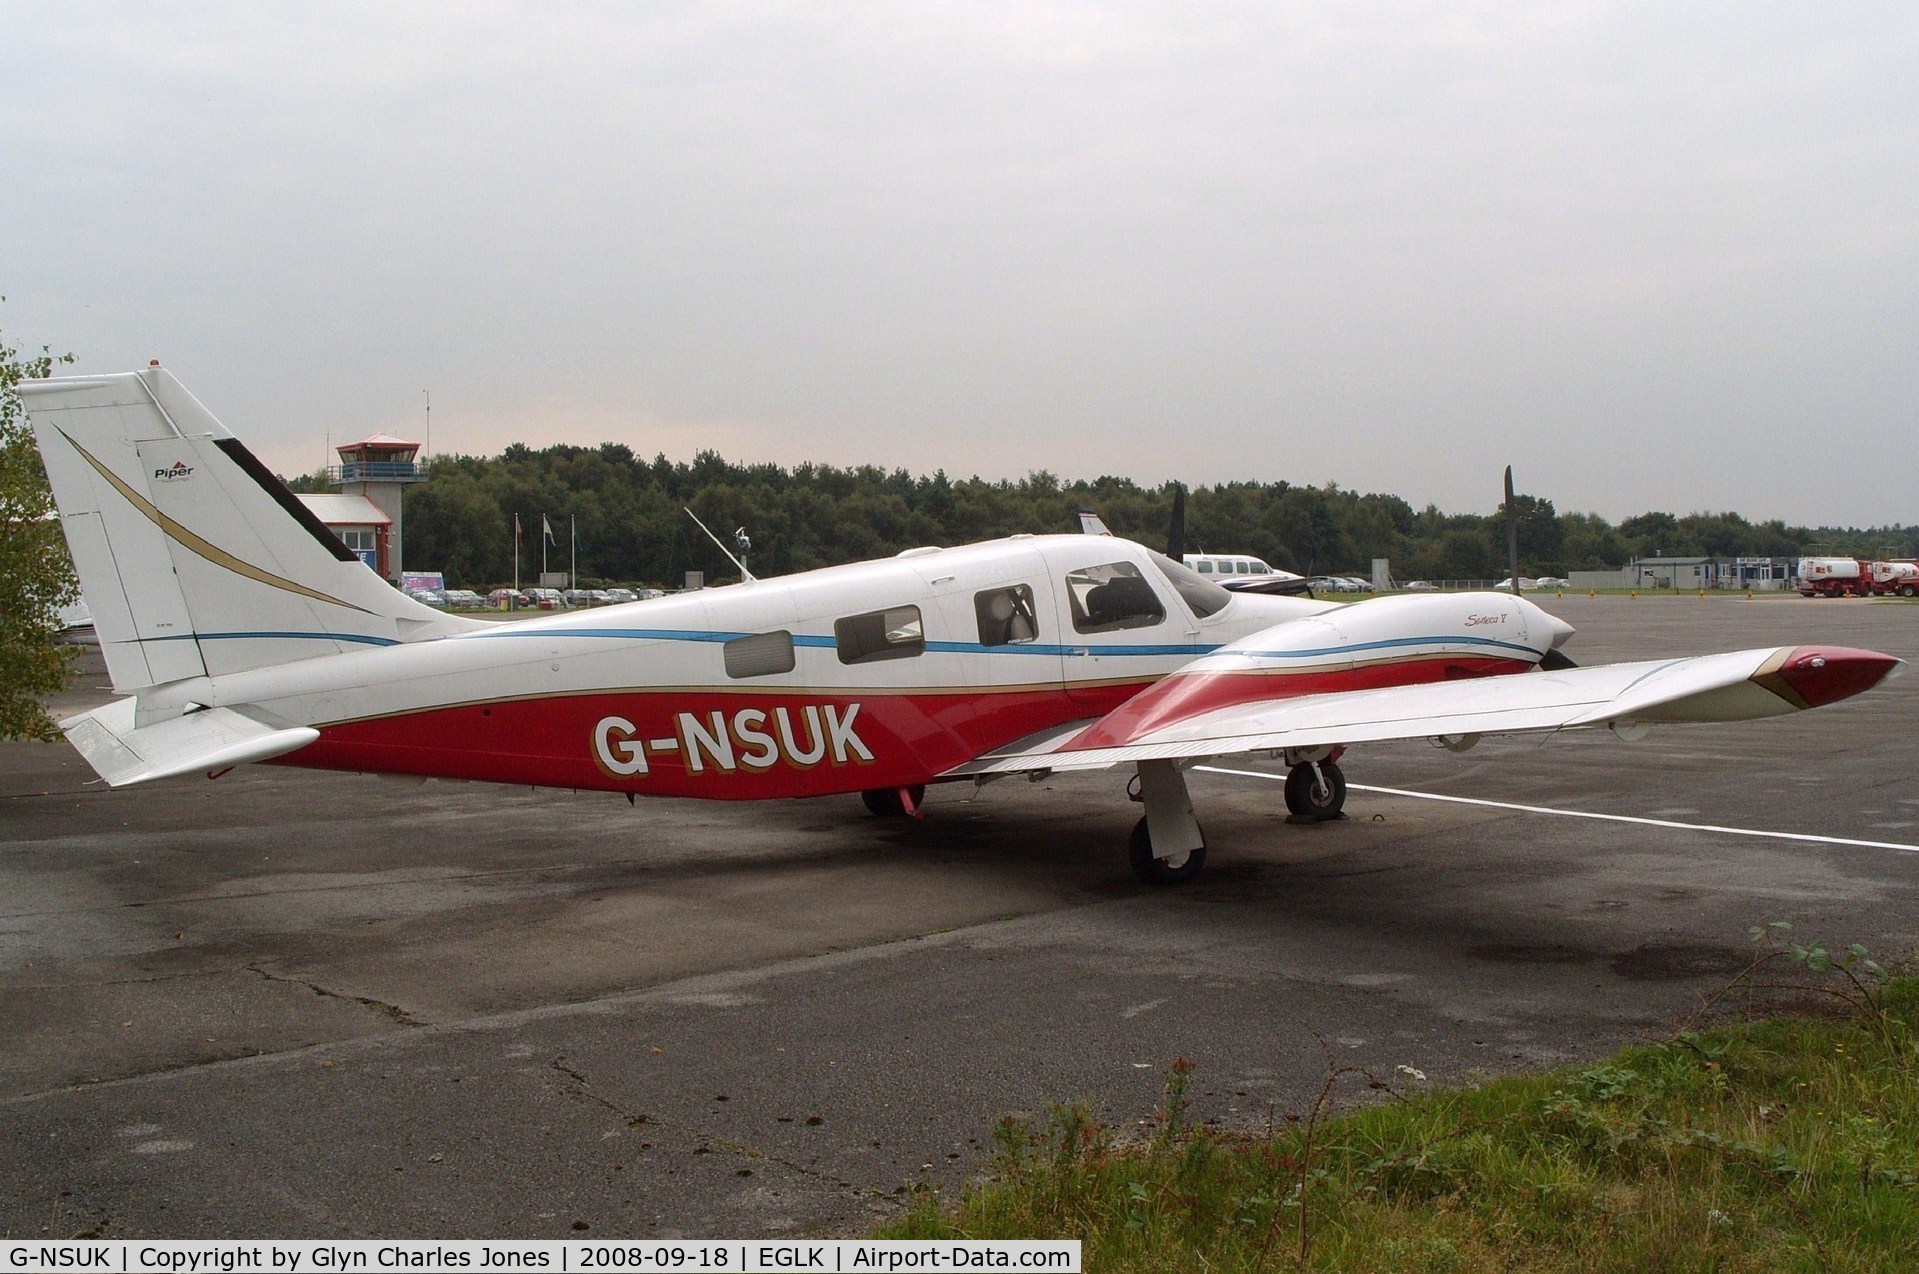 G-NSUK, 2002 Piper PA-34-220T Seneca V C/N 34-49256, Previously N126RB. Owned by Genus PLC. It has now been sold to Langsteiner Flugbetrieb Keg based in Salzburg, Austria, but still keeping its British registration.